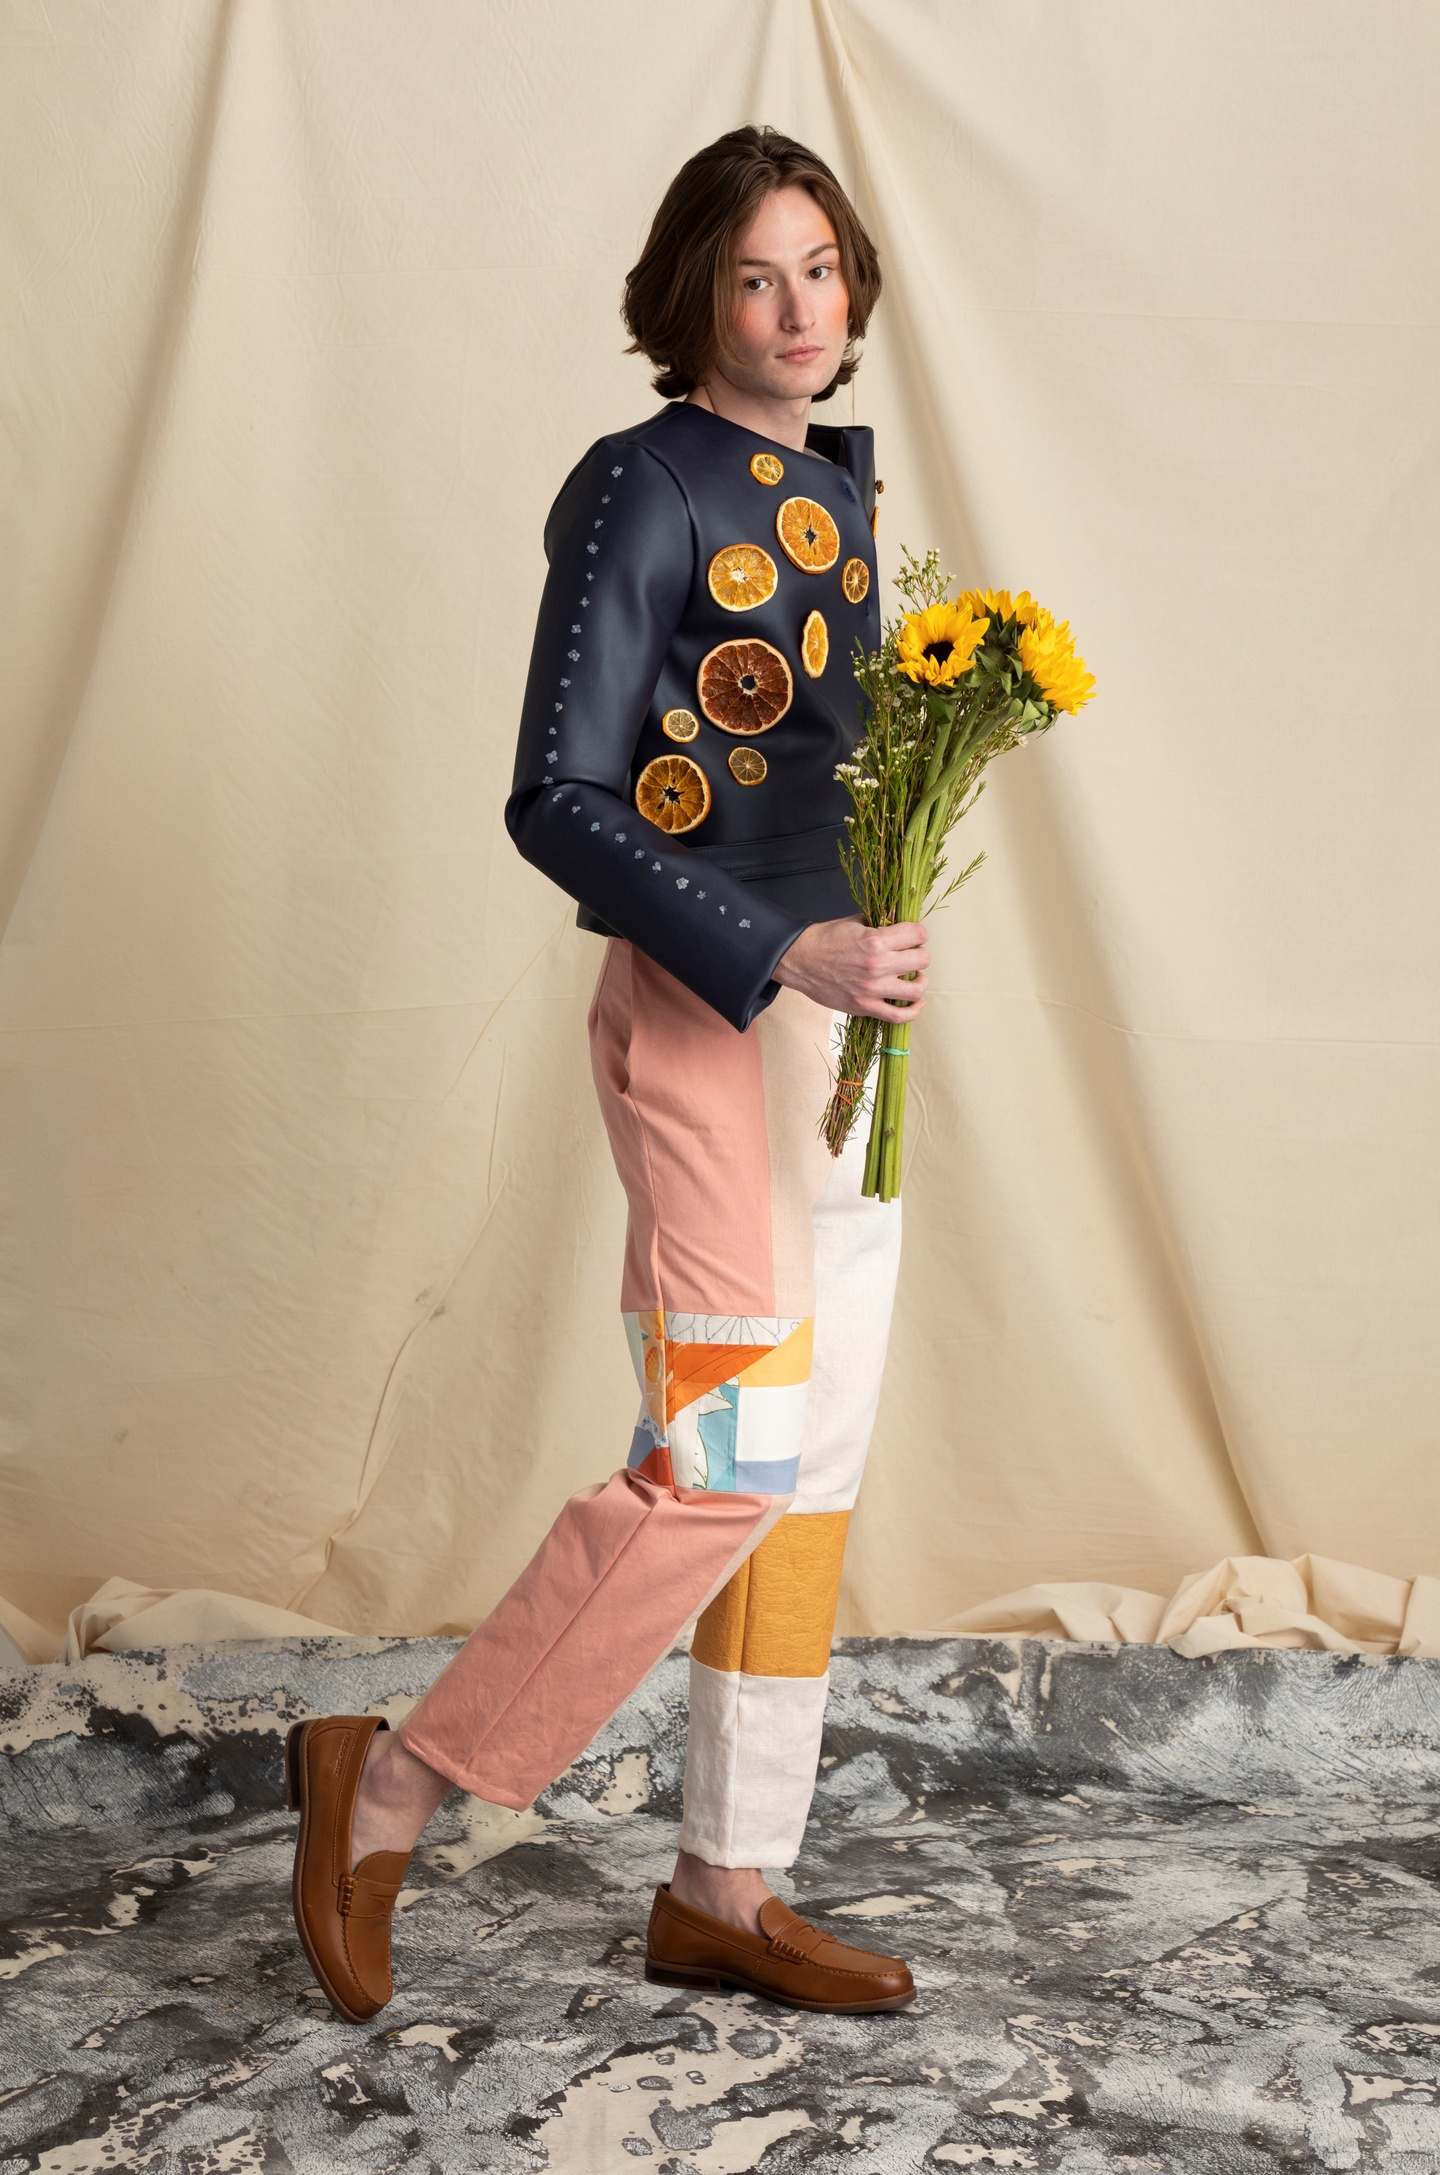 Model wears a black fake leather jacket studded with dried orange slices and narrow leg pants made of quilted pieces of pale pink, white, beige, and yellow fabrics. The model wears brown leather loafers and carries a bouquet of yellow flowers.